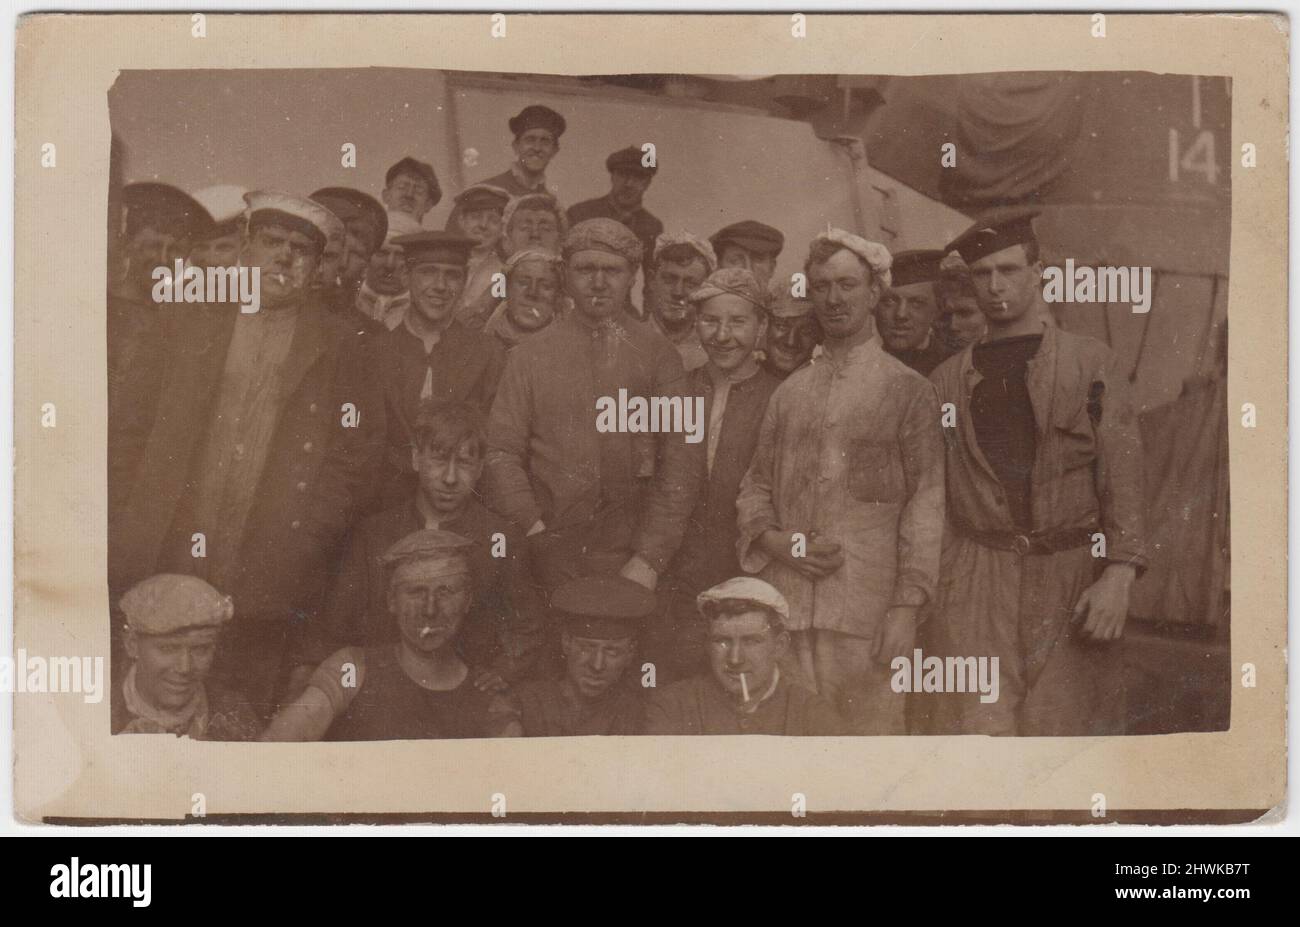 Group photograph of Royal Navy stokers in the early 20th century (First World War period). Many of the men are smoking cigarettes, their clothes and faces are marked with soot, and they are wearing a range of headwear - army and navy style caps, flat caps and knotted handkerchiefs Stock Photo